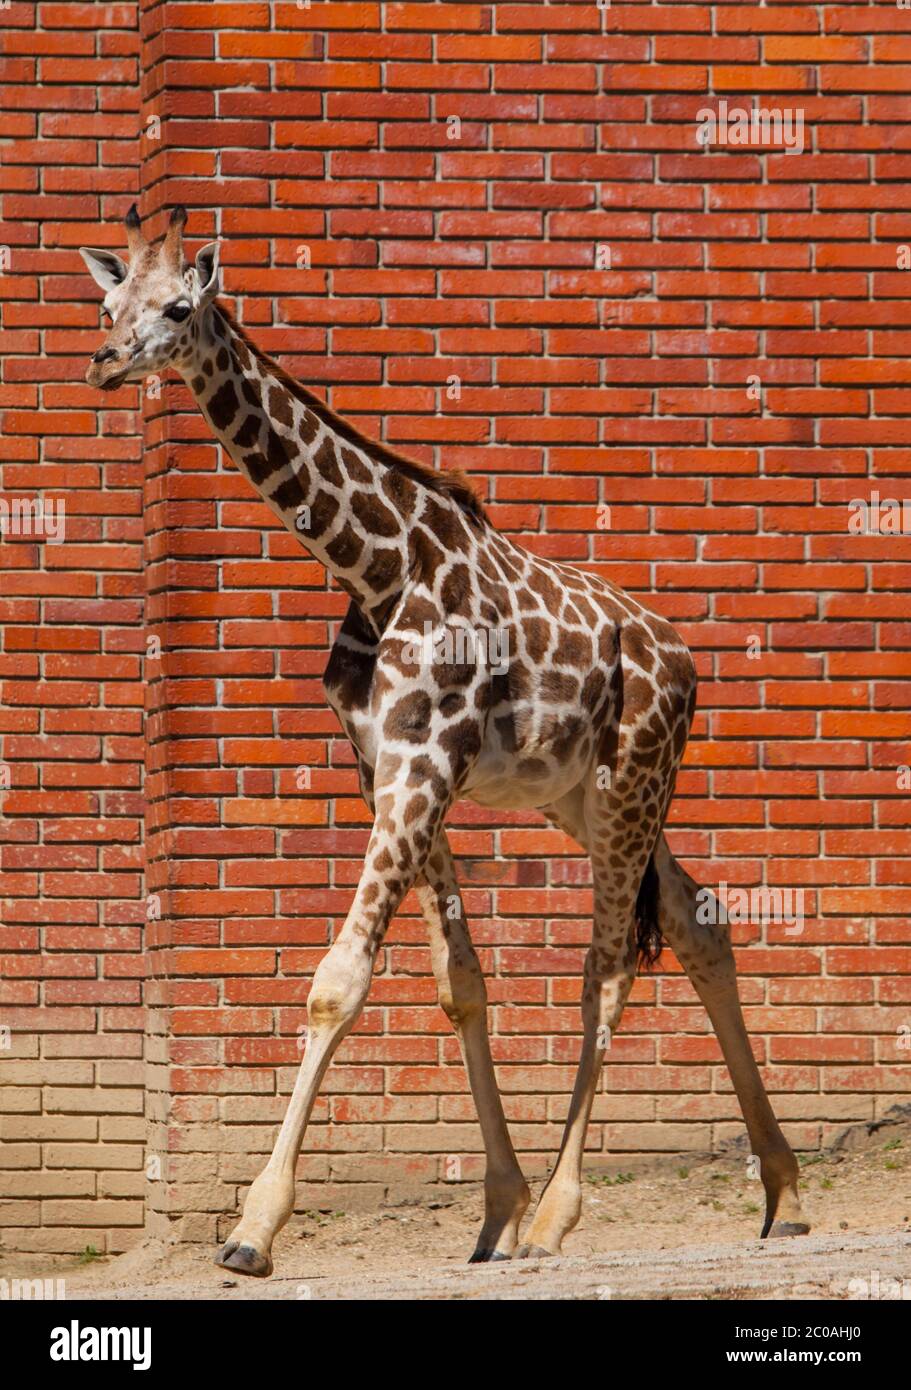 Young girafe in front of the brick wall Stock Photo